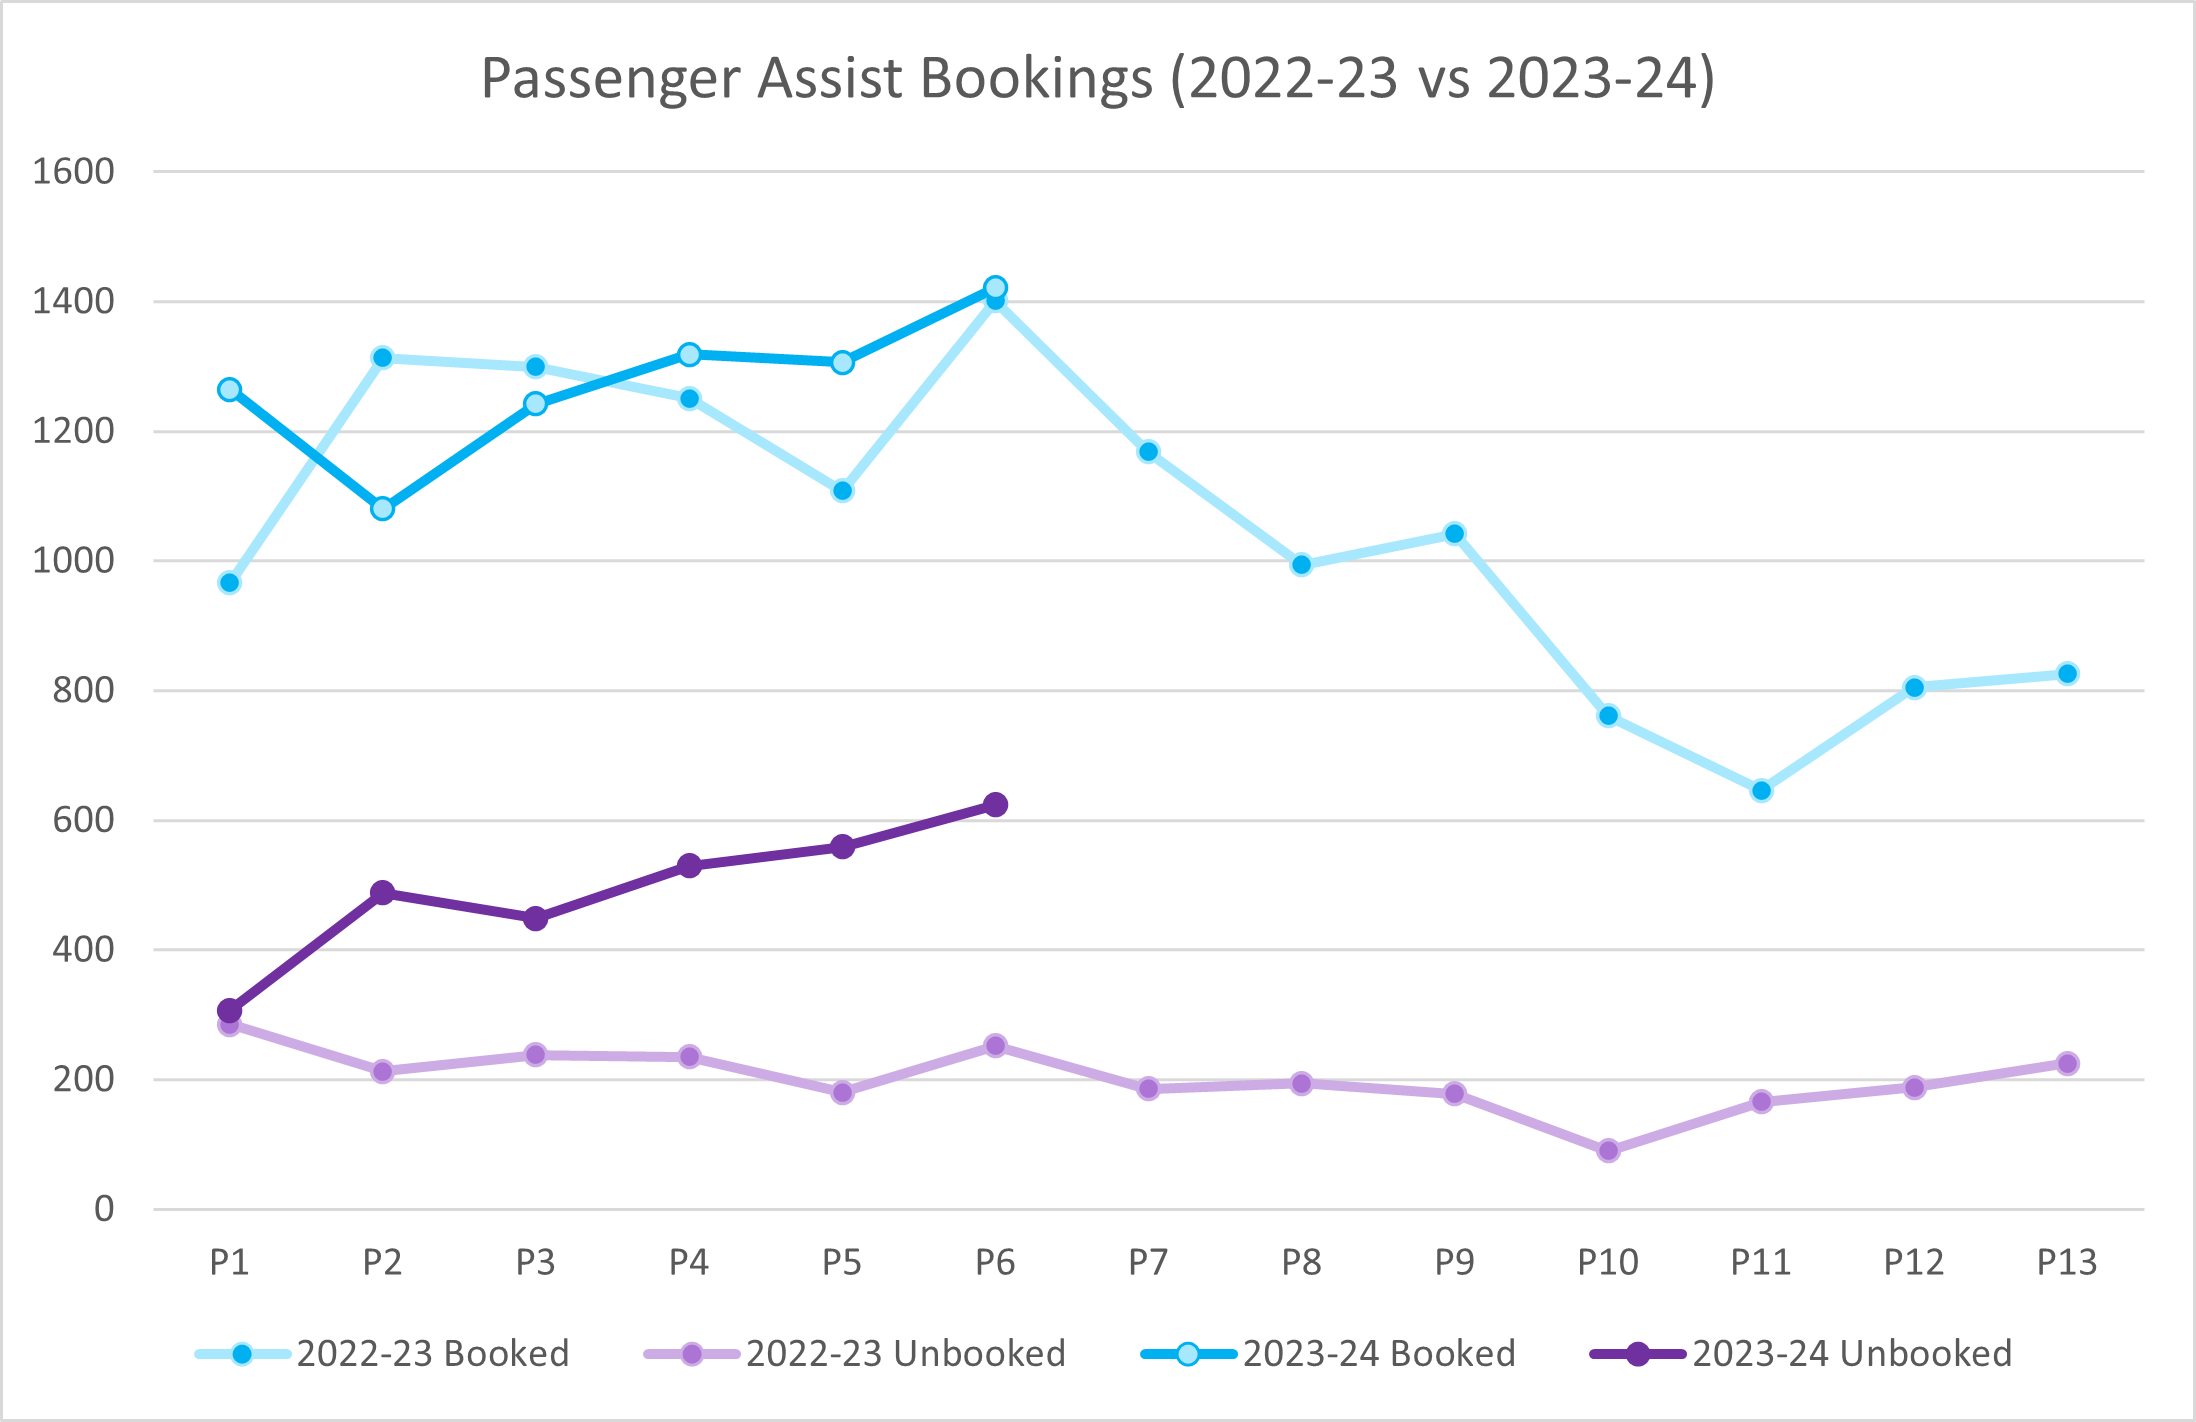 A graph showing the number of passenger assist bookings made 